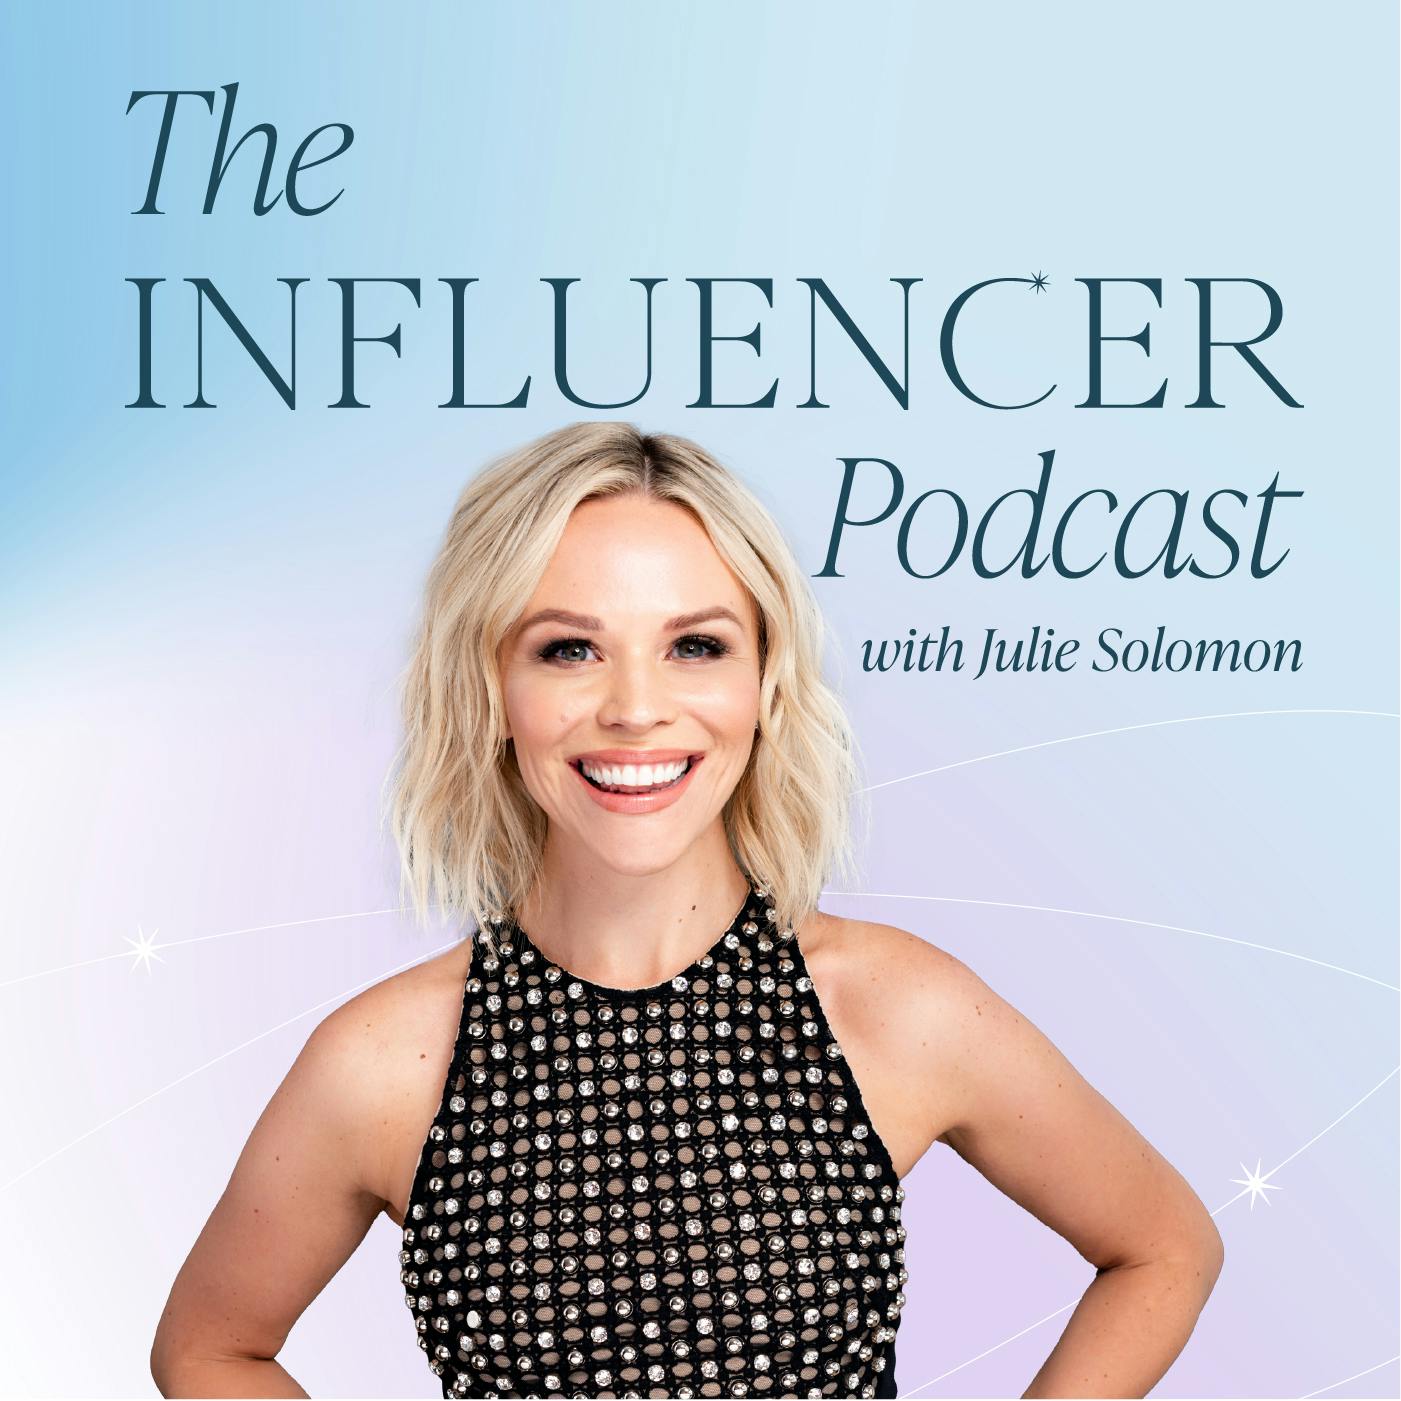 How They Quit Their Jobs & Became Full-Time Influencers